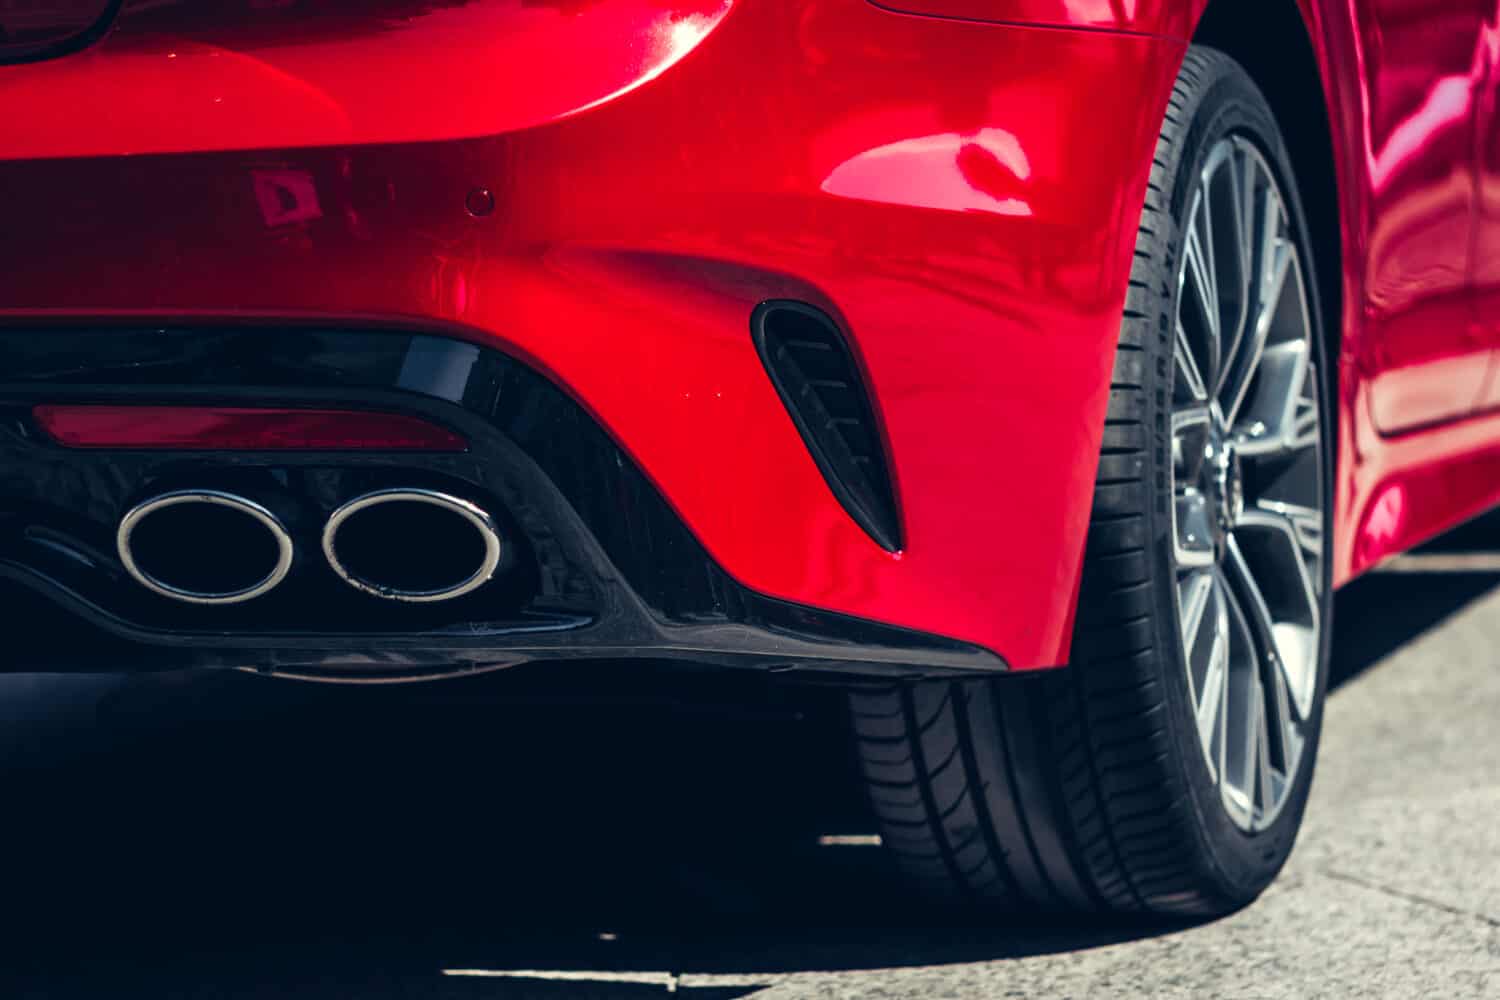 <p>The Kia Stinger is a fantastic car that definitely borders on what should or shouldn’t be considered luxury. It’s certainly a <em>premium</em> offering from Kia and has some great performance stats (a 2.5-liter turbocharger V4 with 300-hp, or a 3.3-liter twin-turbo V6 with 358-hp). Its performance keeps it competing with cars like the A4 and 3 Series, despite being underpriced when compared to them. It’s a toss-up because of the brand, but the trim levels and interior of this car definitely feel and look luxury.</p> <ul> <li><strong>Price: </strong>$36,690-$54,090</li> <li><strong>Body Style:</strong>Sedan</li> <li><strong>Power-Type: </strong>Gas</li> </ul> <p>Agree with this? Hit the Thumbs Up button above. Disagree? Let us know in the comments with what you'd change.</p>